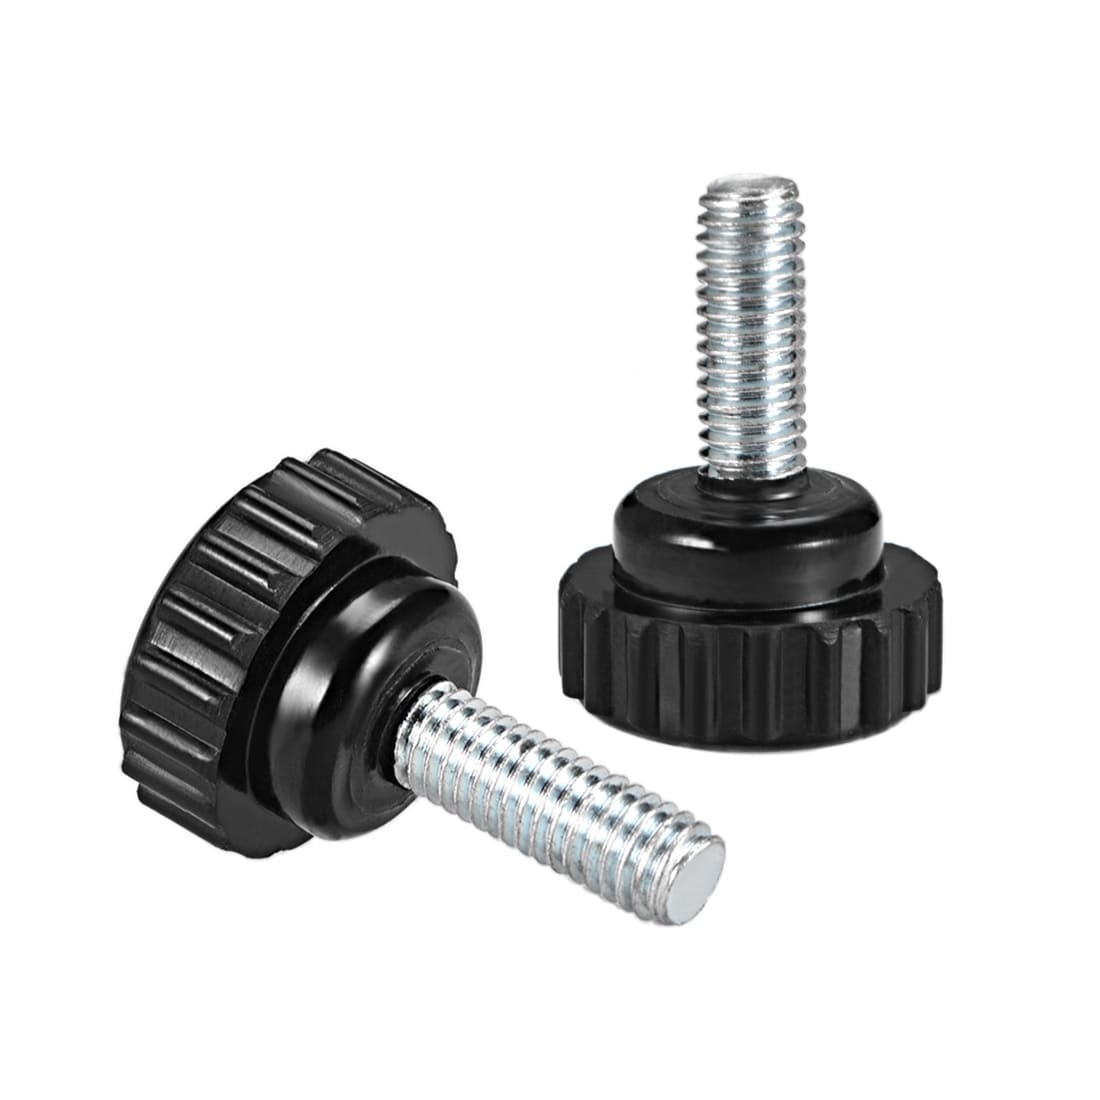 #10-24 x 1/2 Thumb Screw Stainless Steel Proudly Built in USA Length: 0.500 Standard/Coarse Thread Thumbscrew Black Knurled Round Plastic Knob 4 Package of 